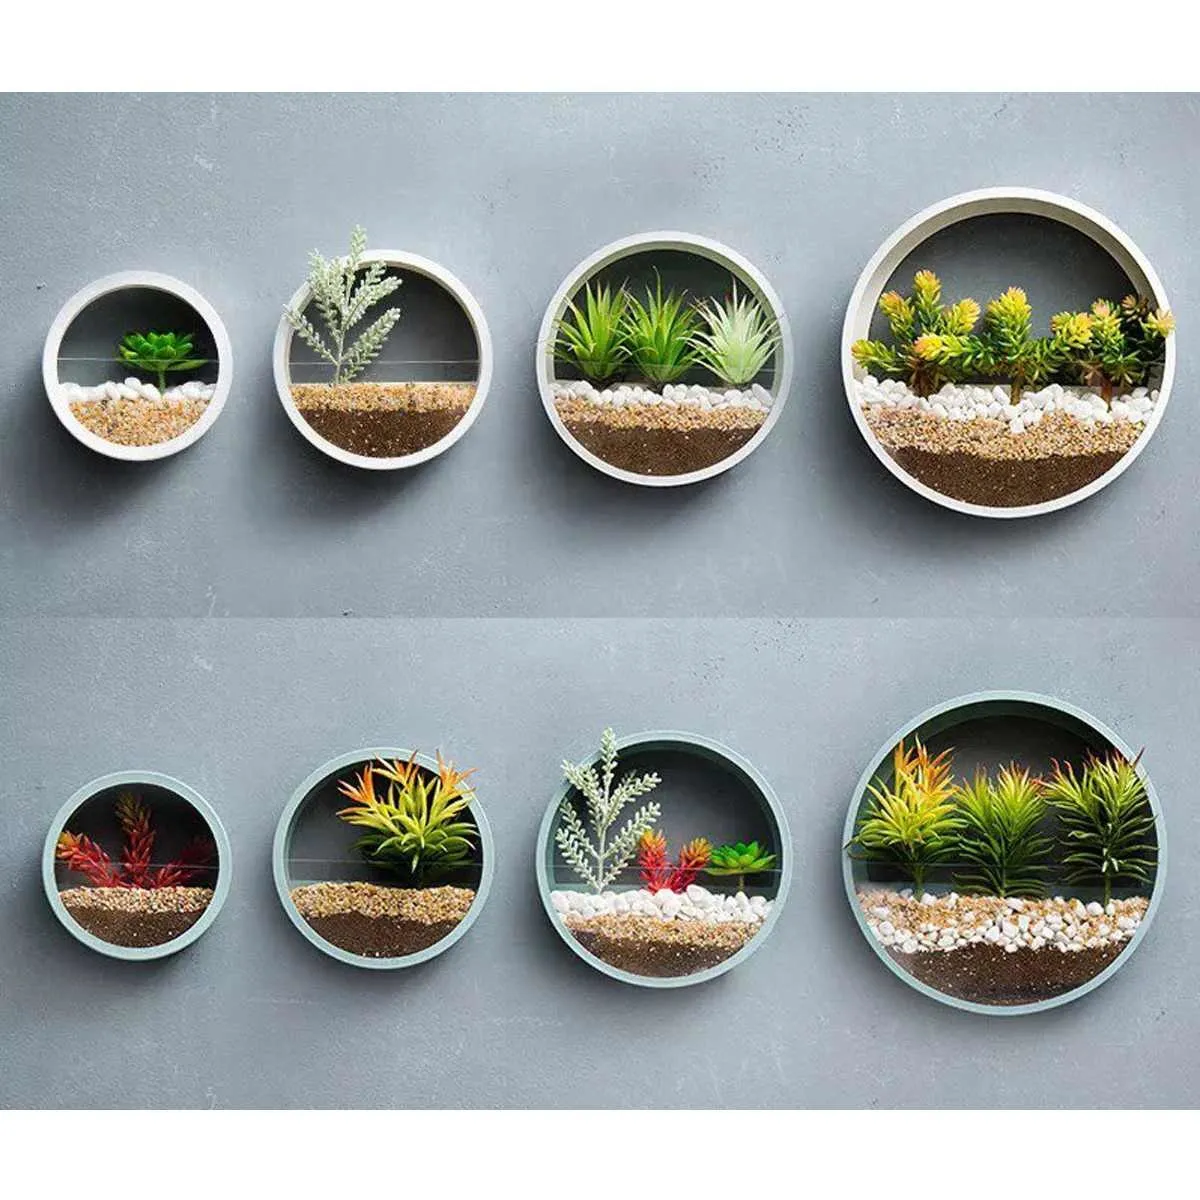 Modern Round Iron Wall Vase Home Living Room Restaurant Hanging Flower Pot Wall Decor Succular Plant Planters Art Glass Vases T20319P